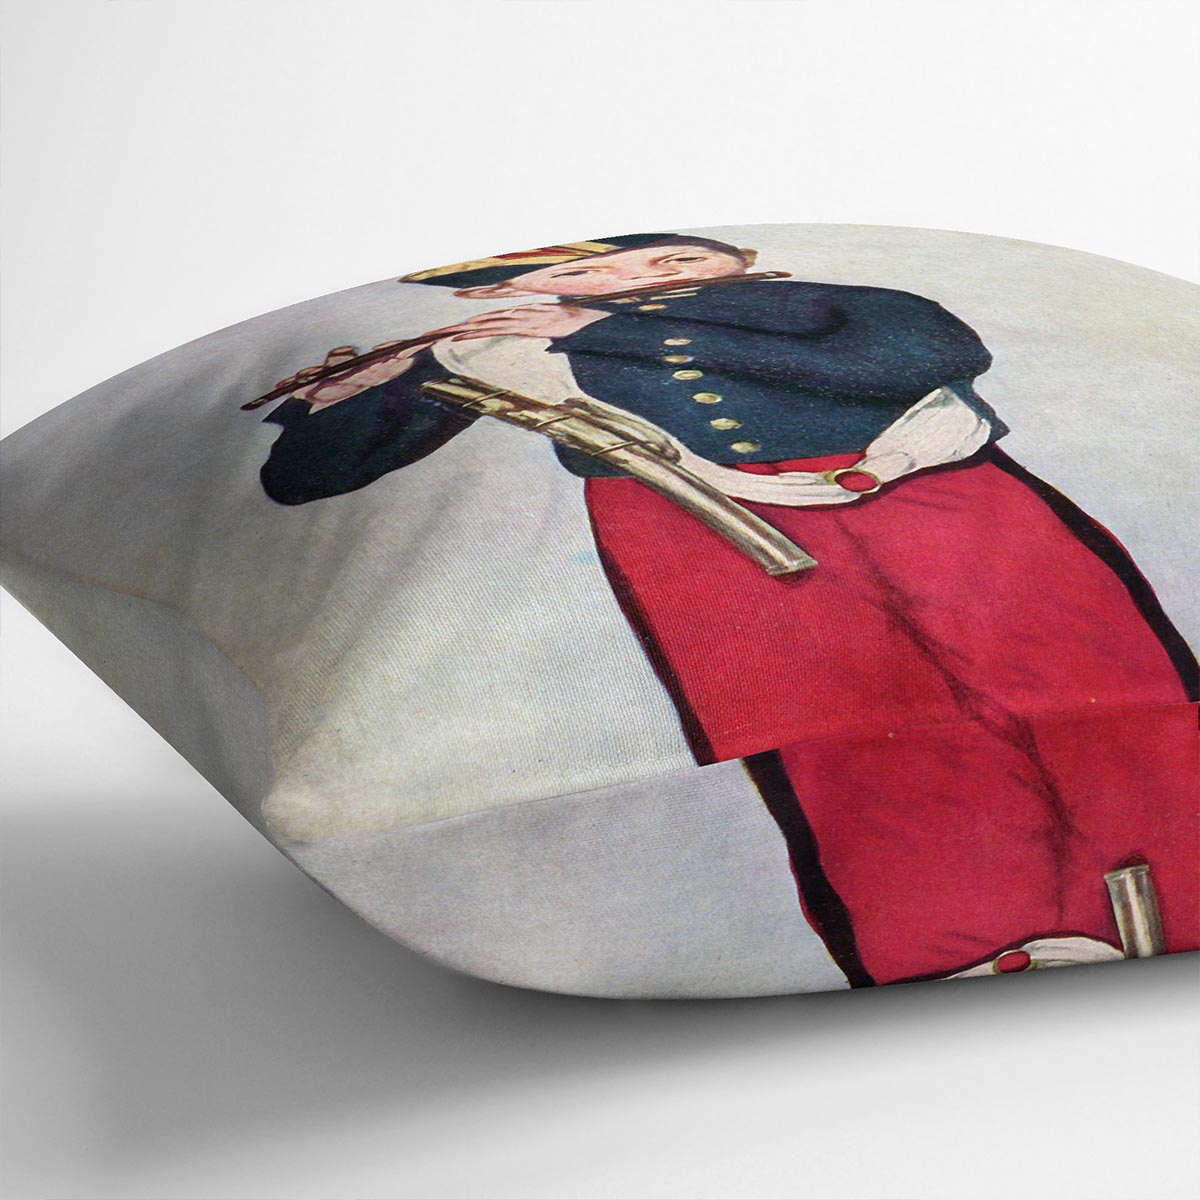 The Piper by Manet Cushion